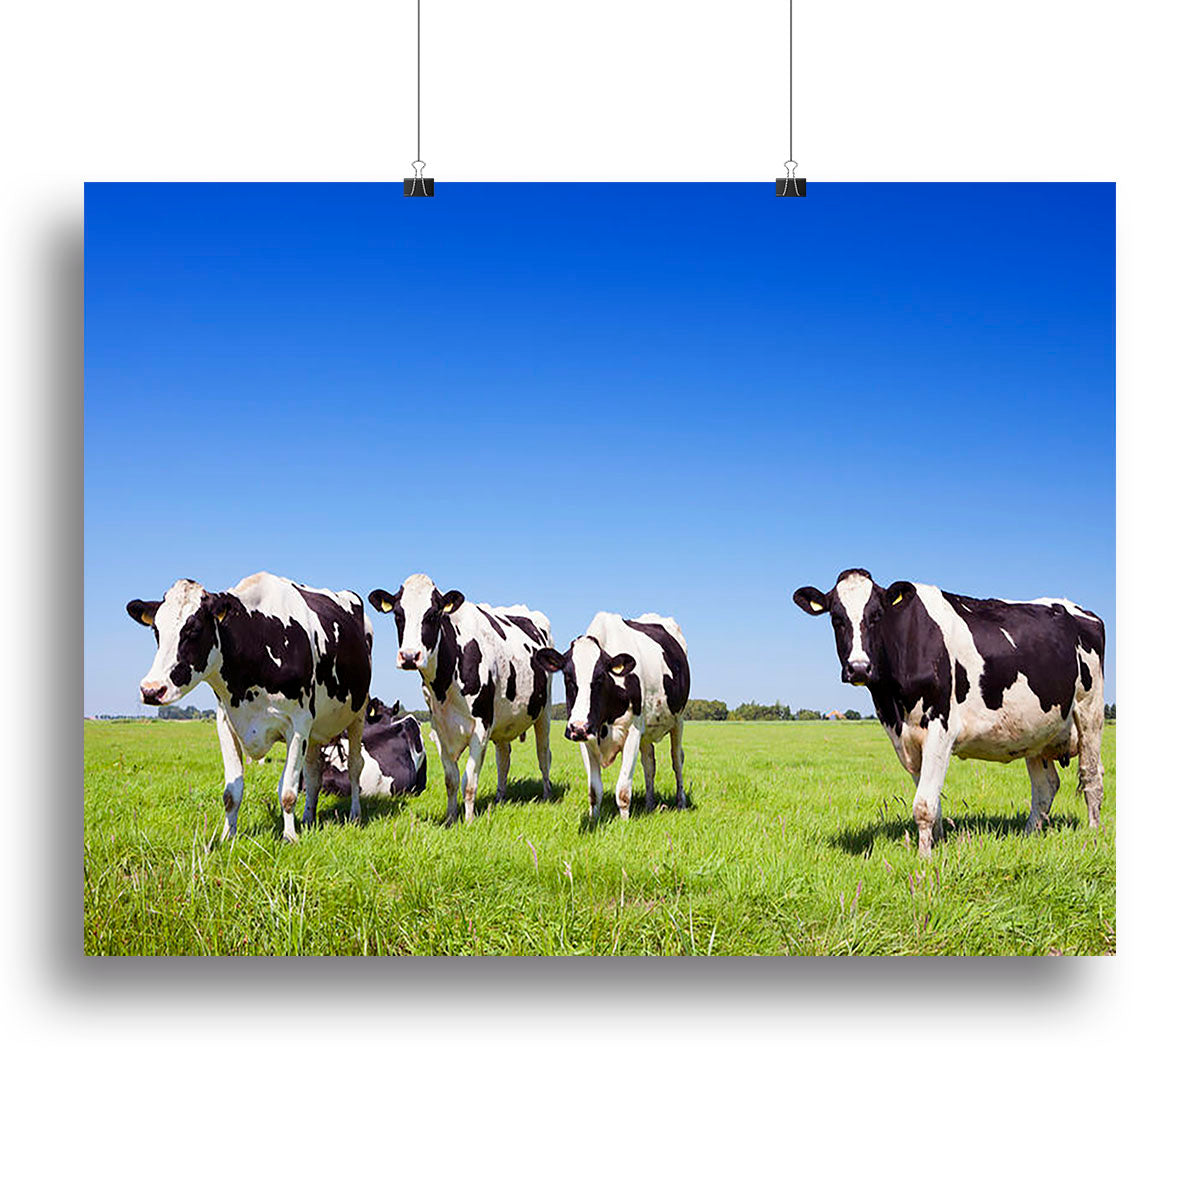 Black and white cows in a grassy field Canvas Print or Poster - Canvas Art Rocks - 2